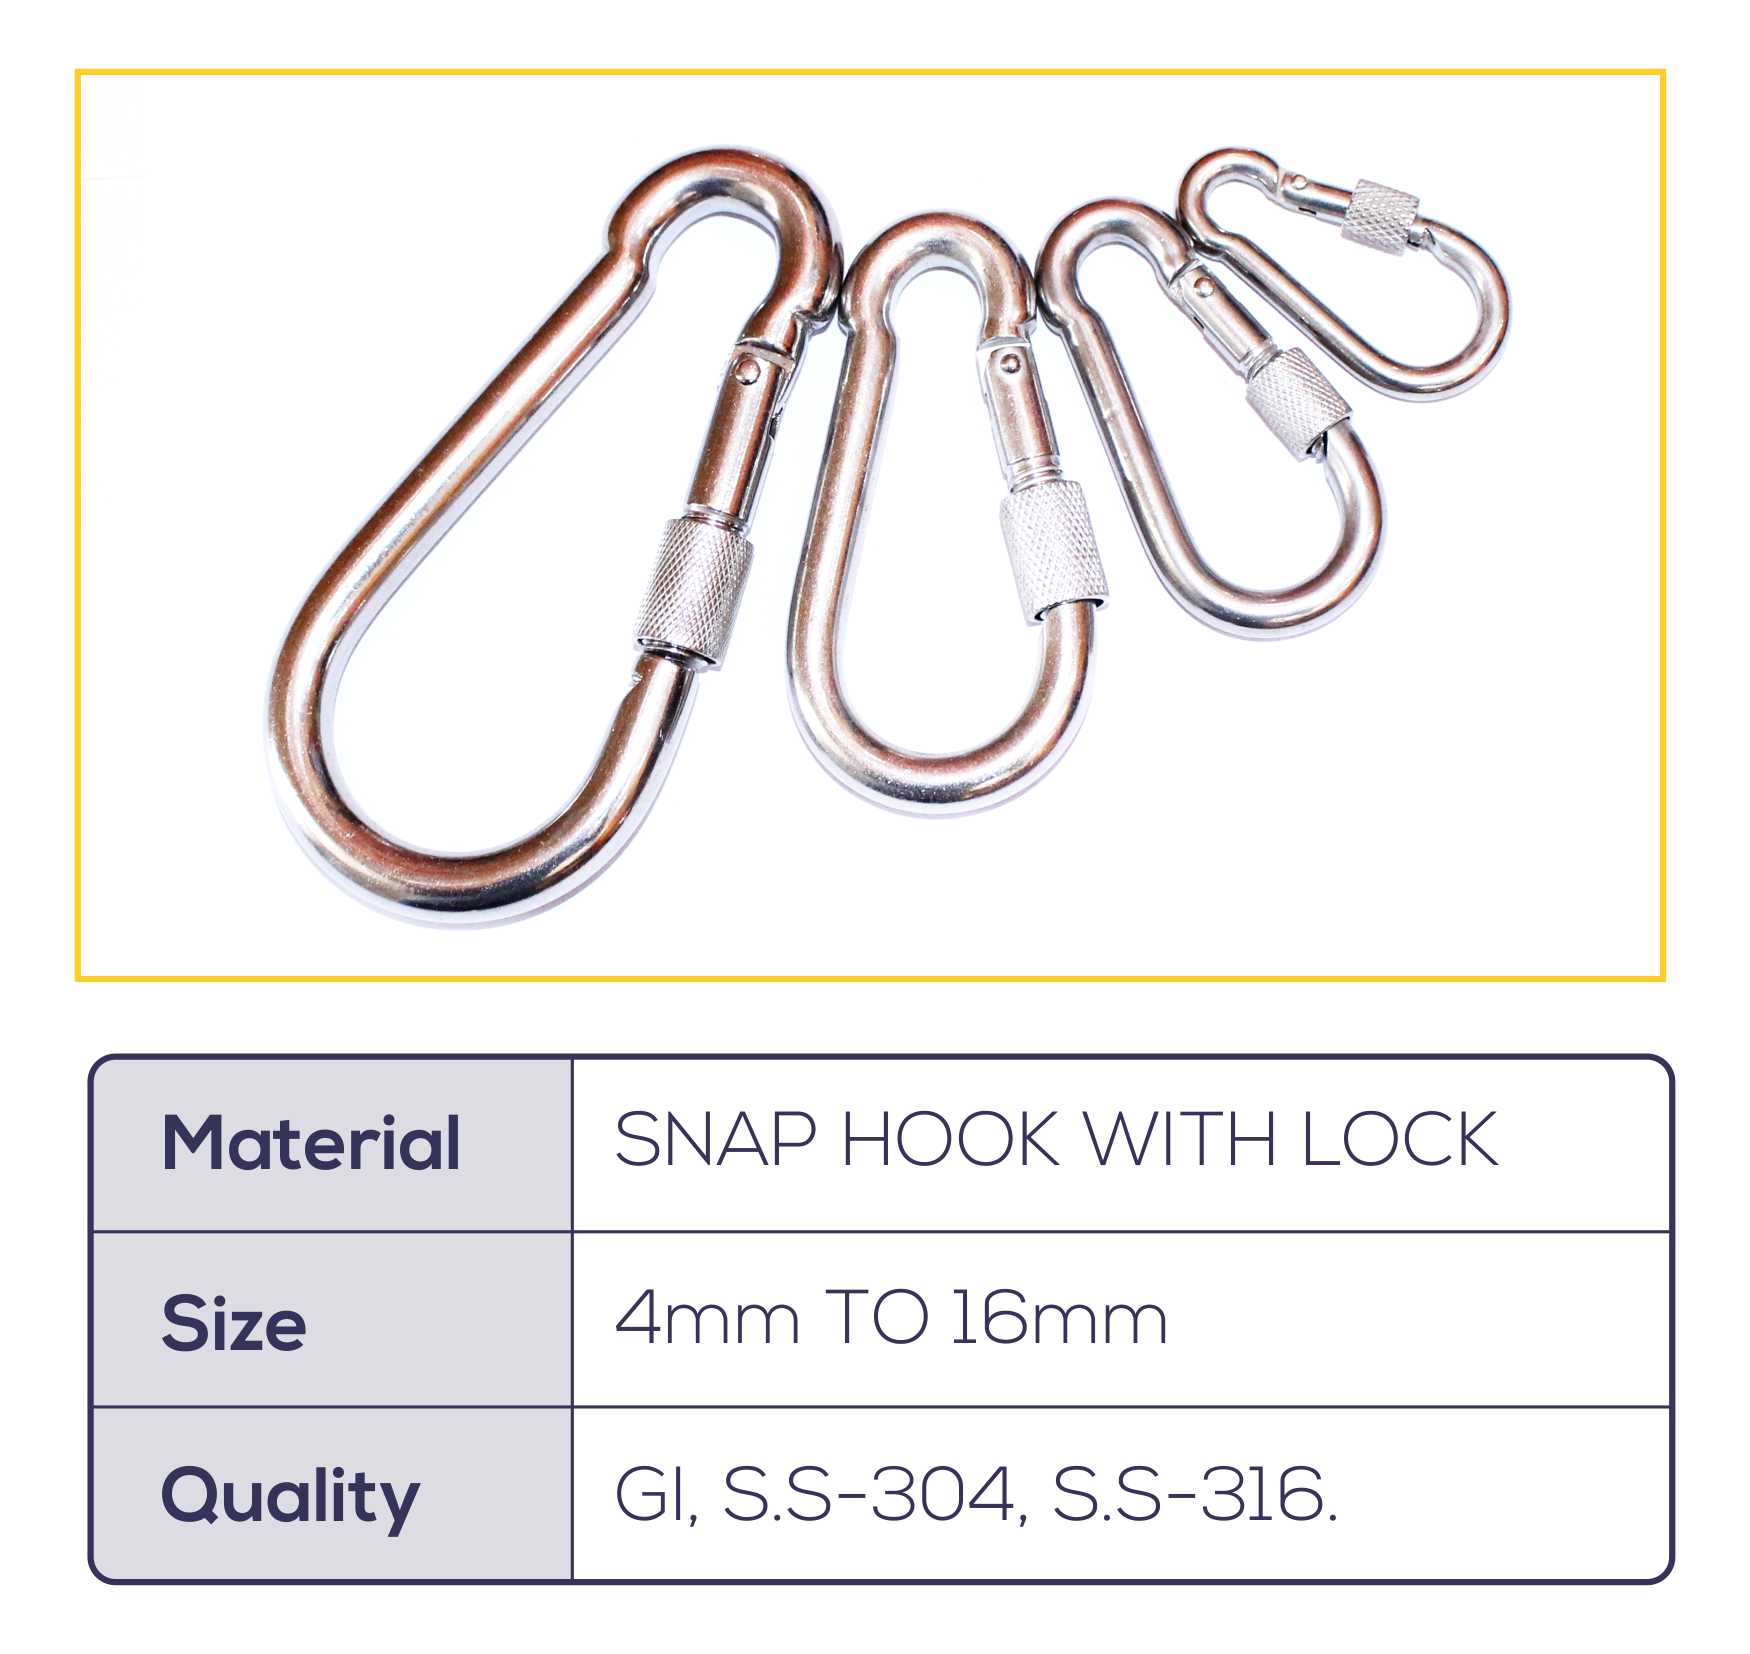 SNAP HOOK WITH LOCK